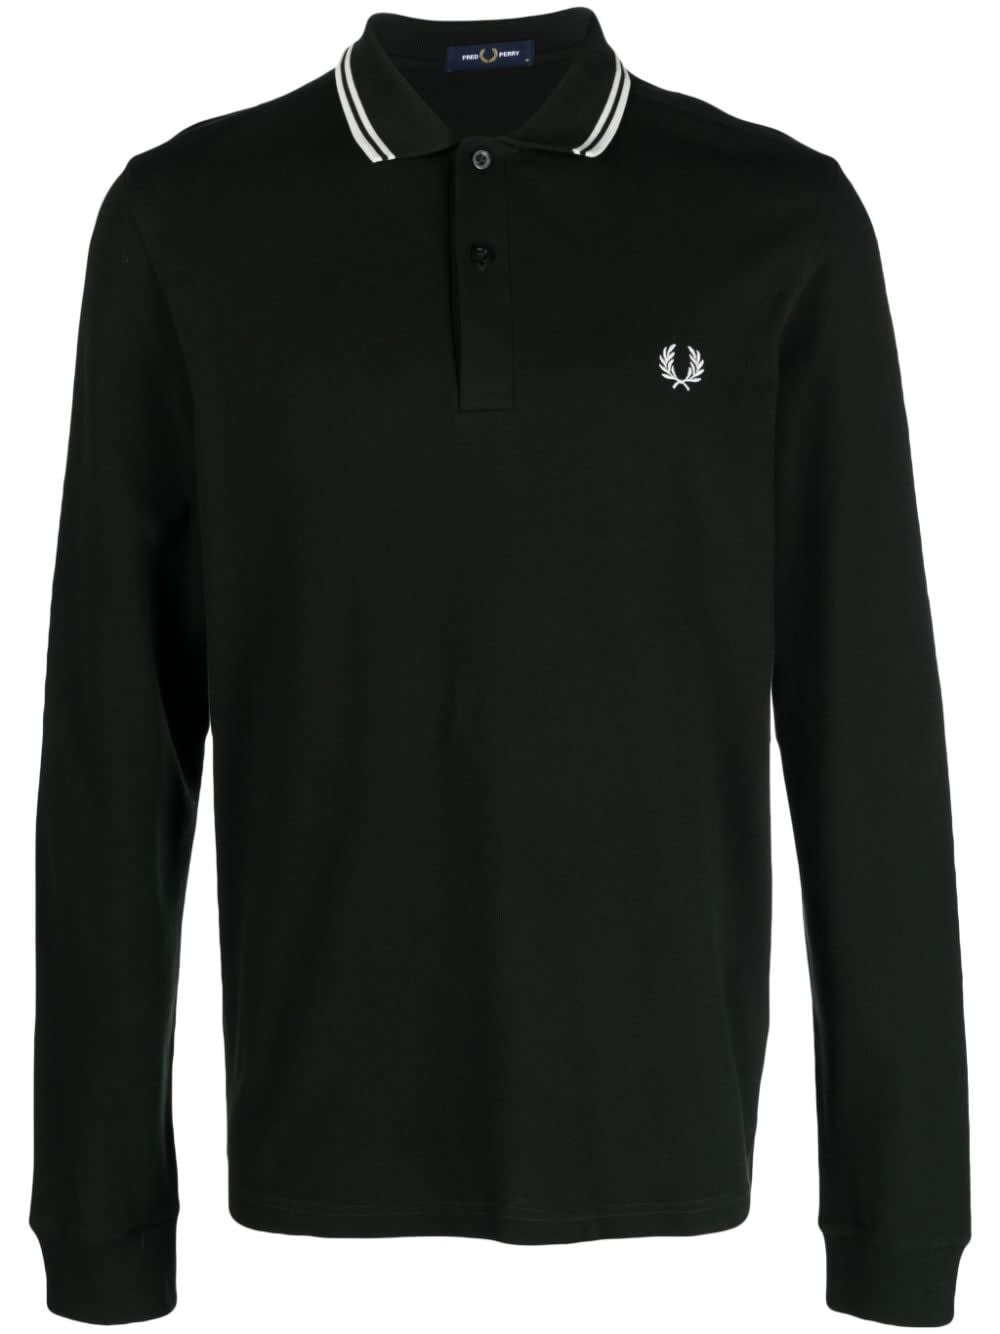 FRED PERRY FP LONG SLEEVE TWIN TIPPED SHIRT